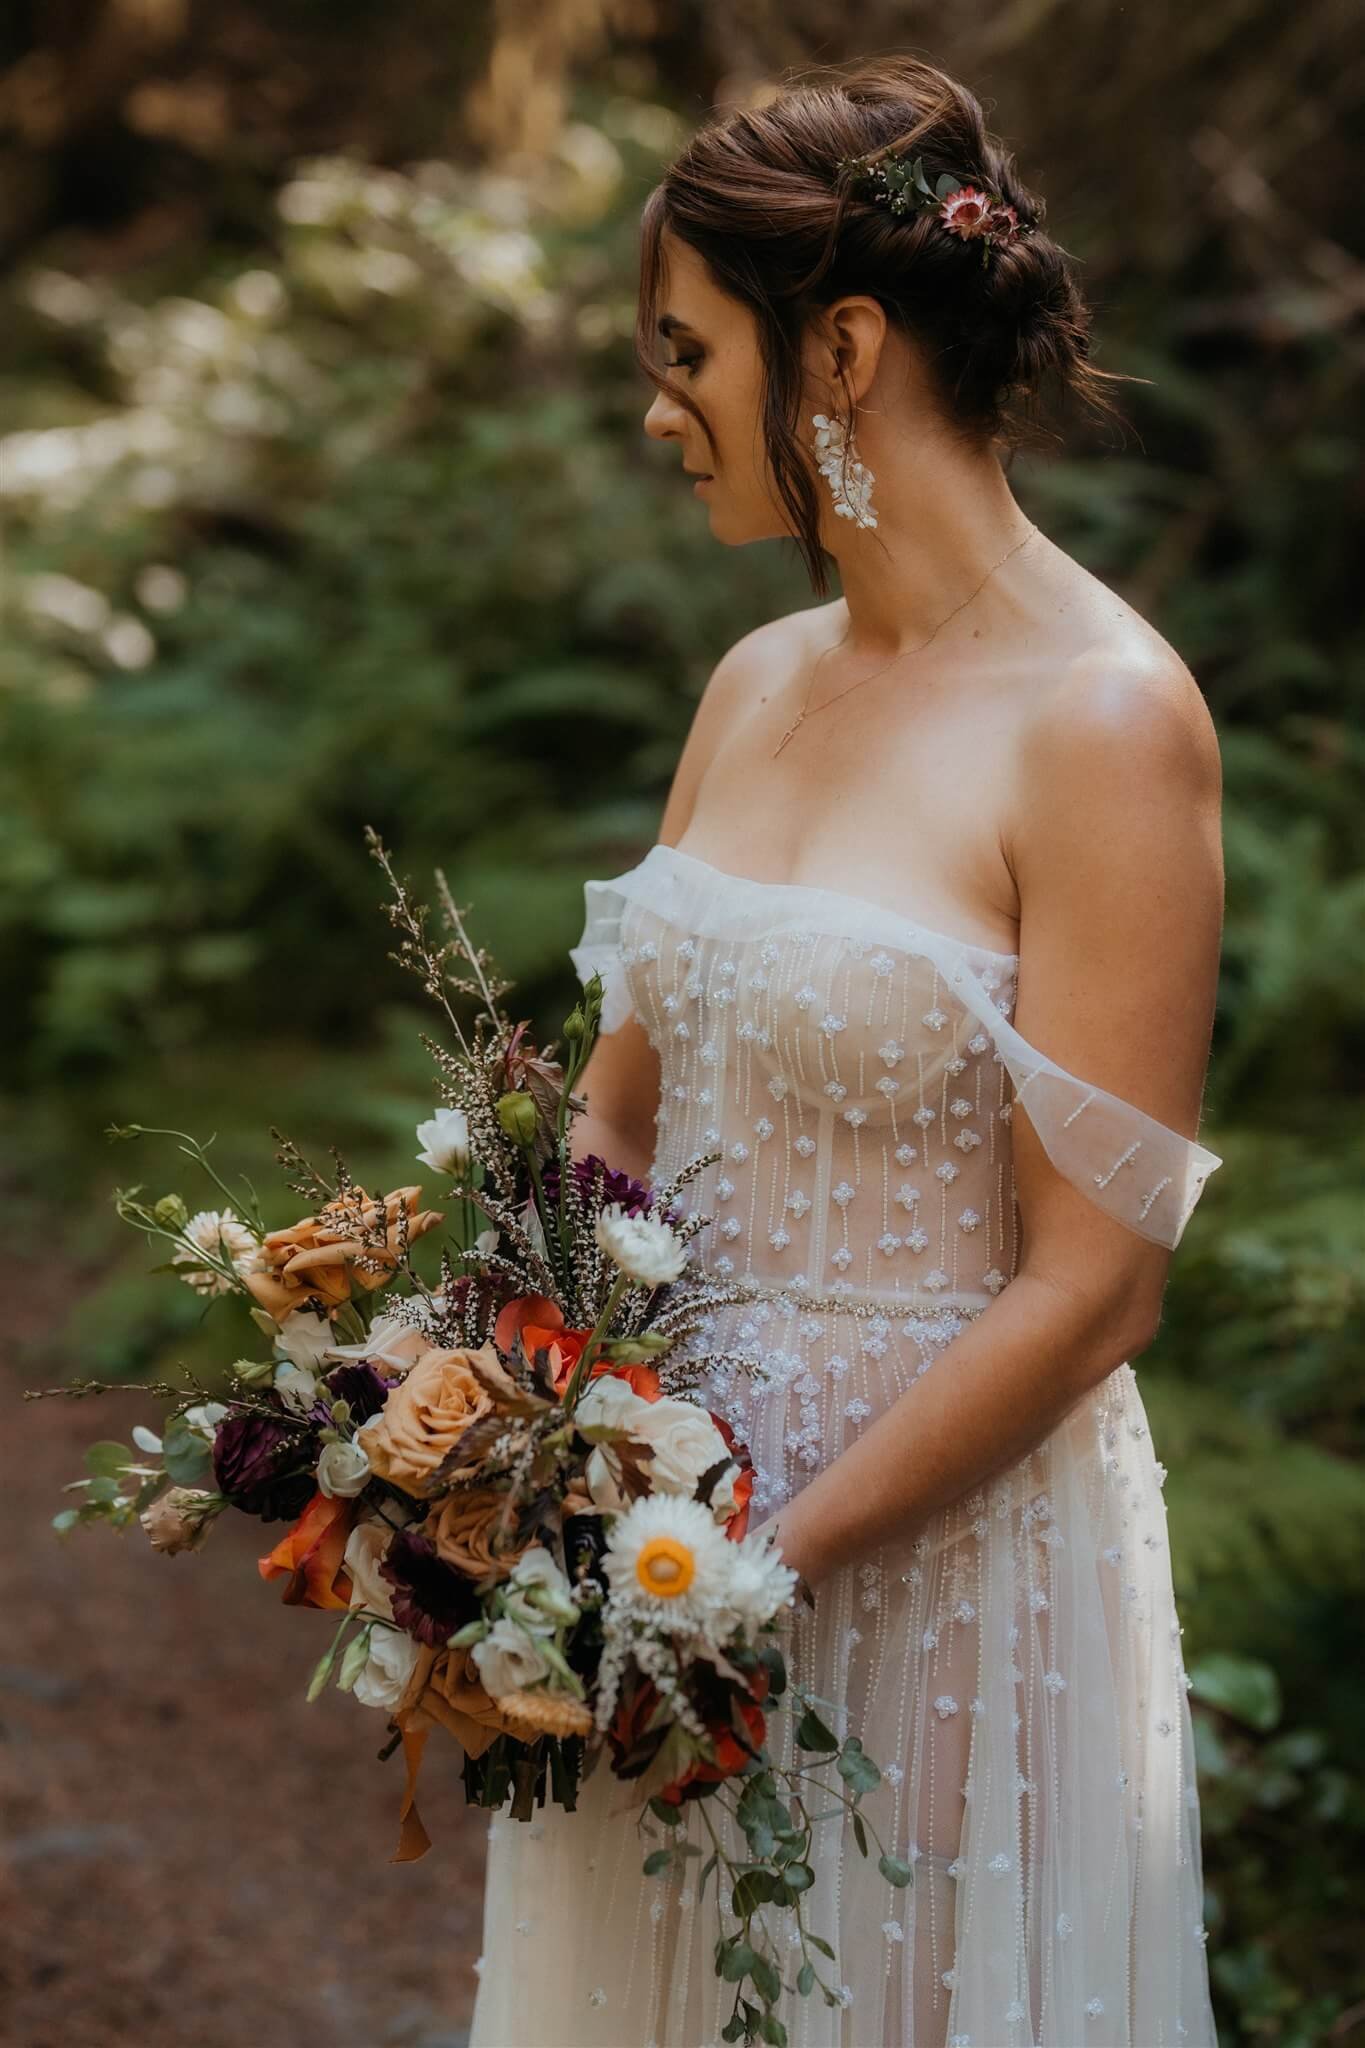 Bride with white sleeveless wedding dress holding colorful floral bouquet